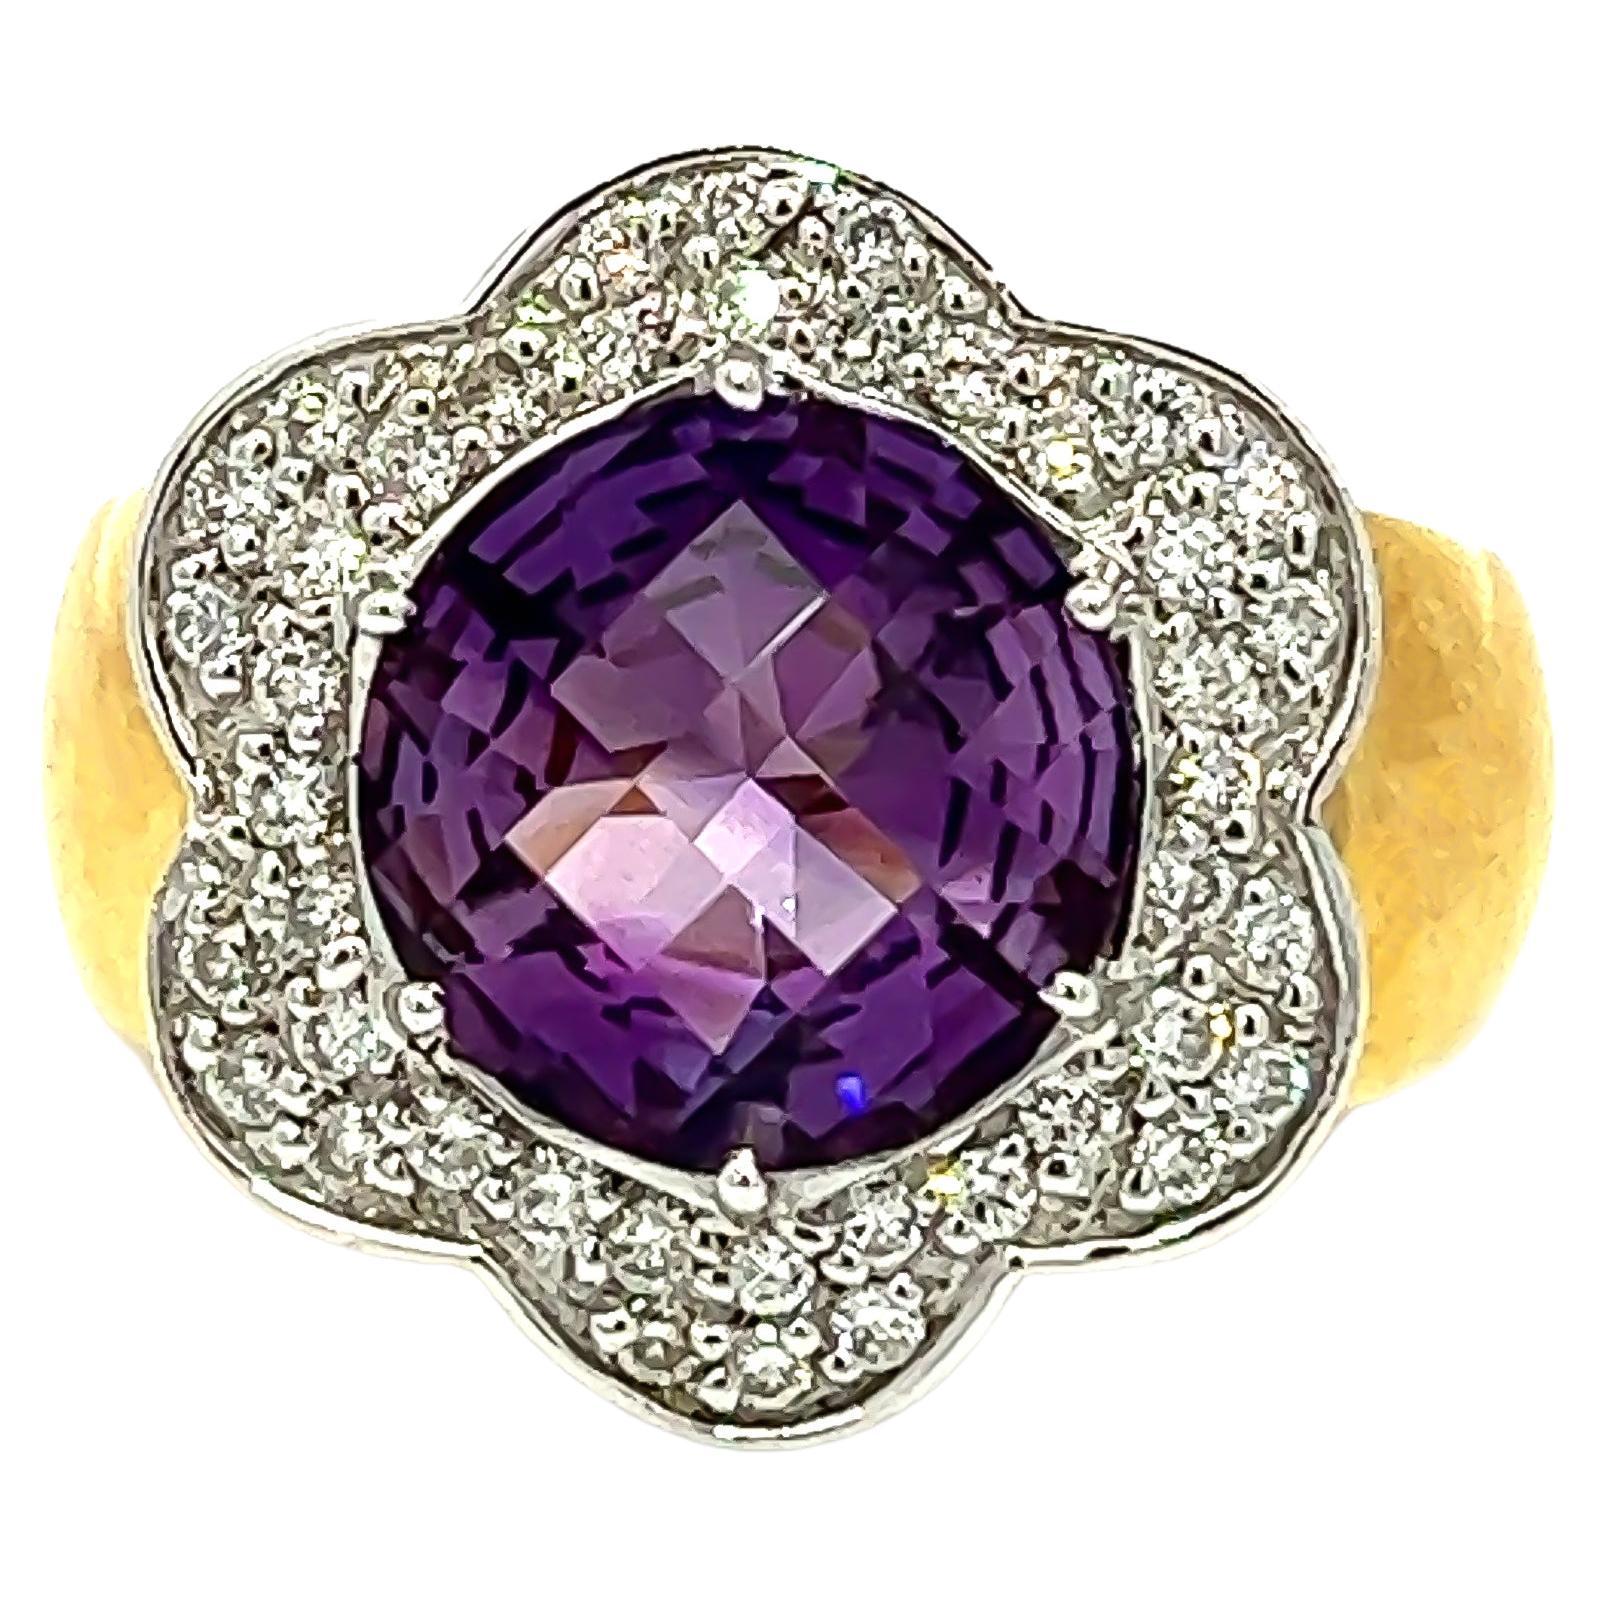 3.79CT Total Weight Amethyst and Diamond Ring set in 18KY/W